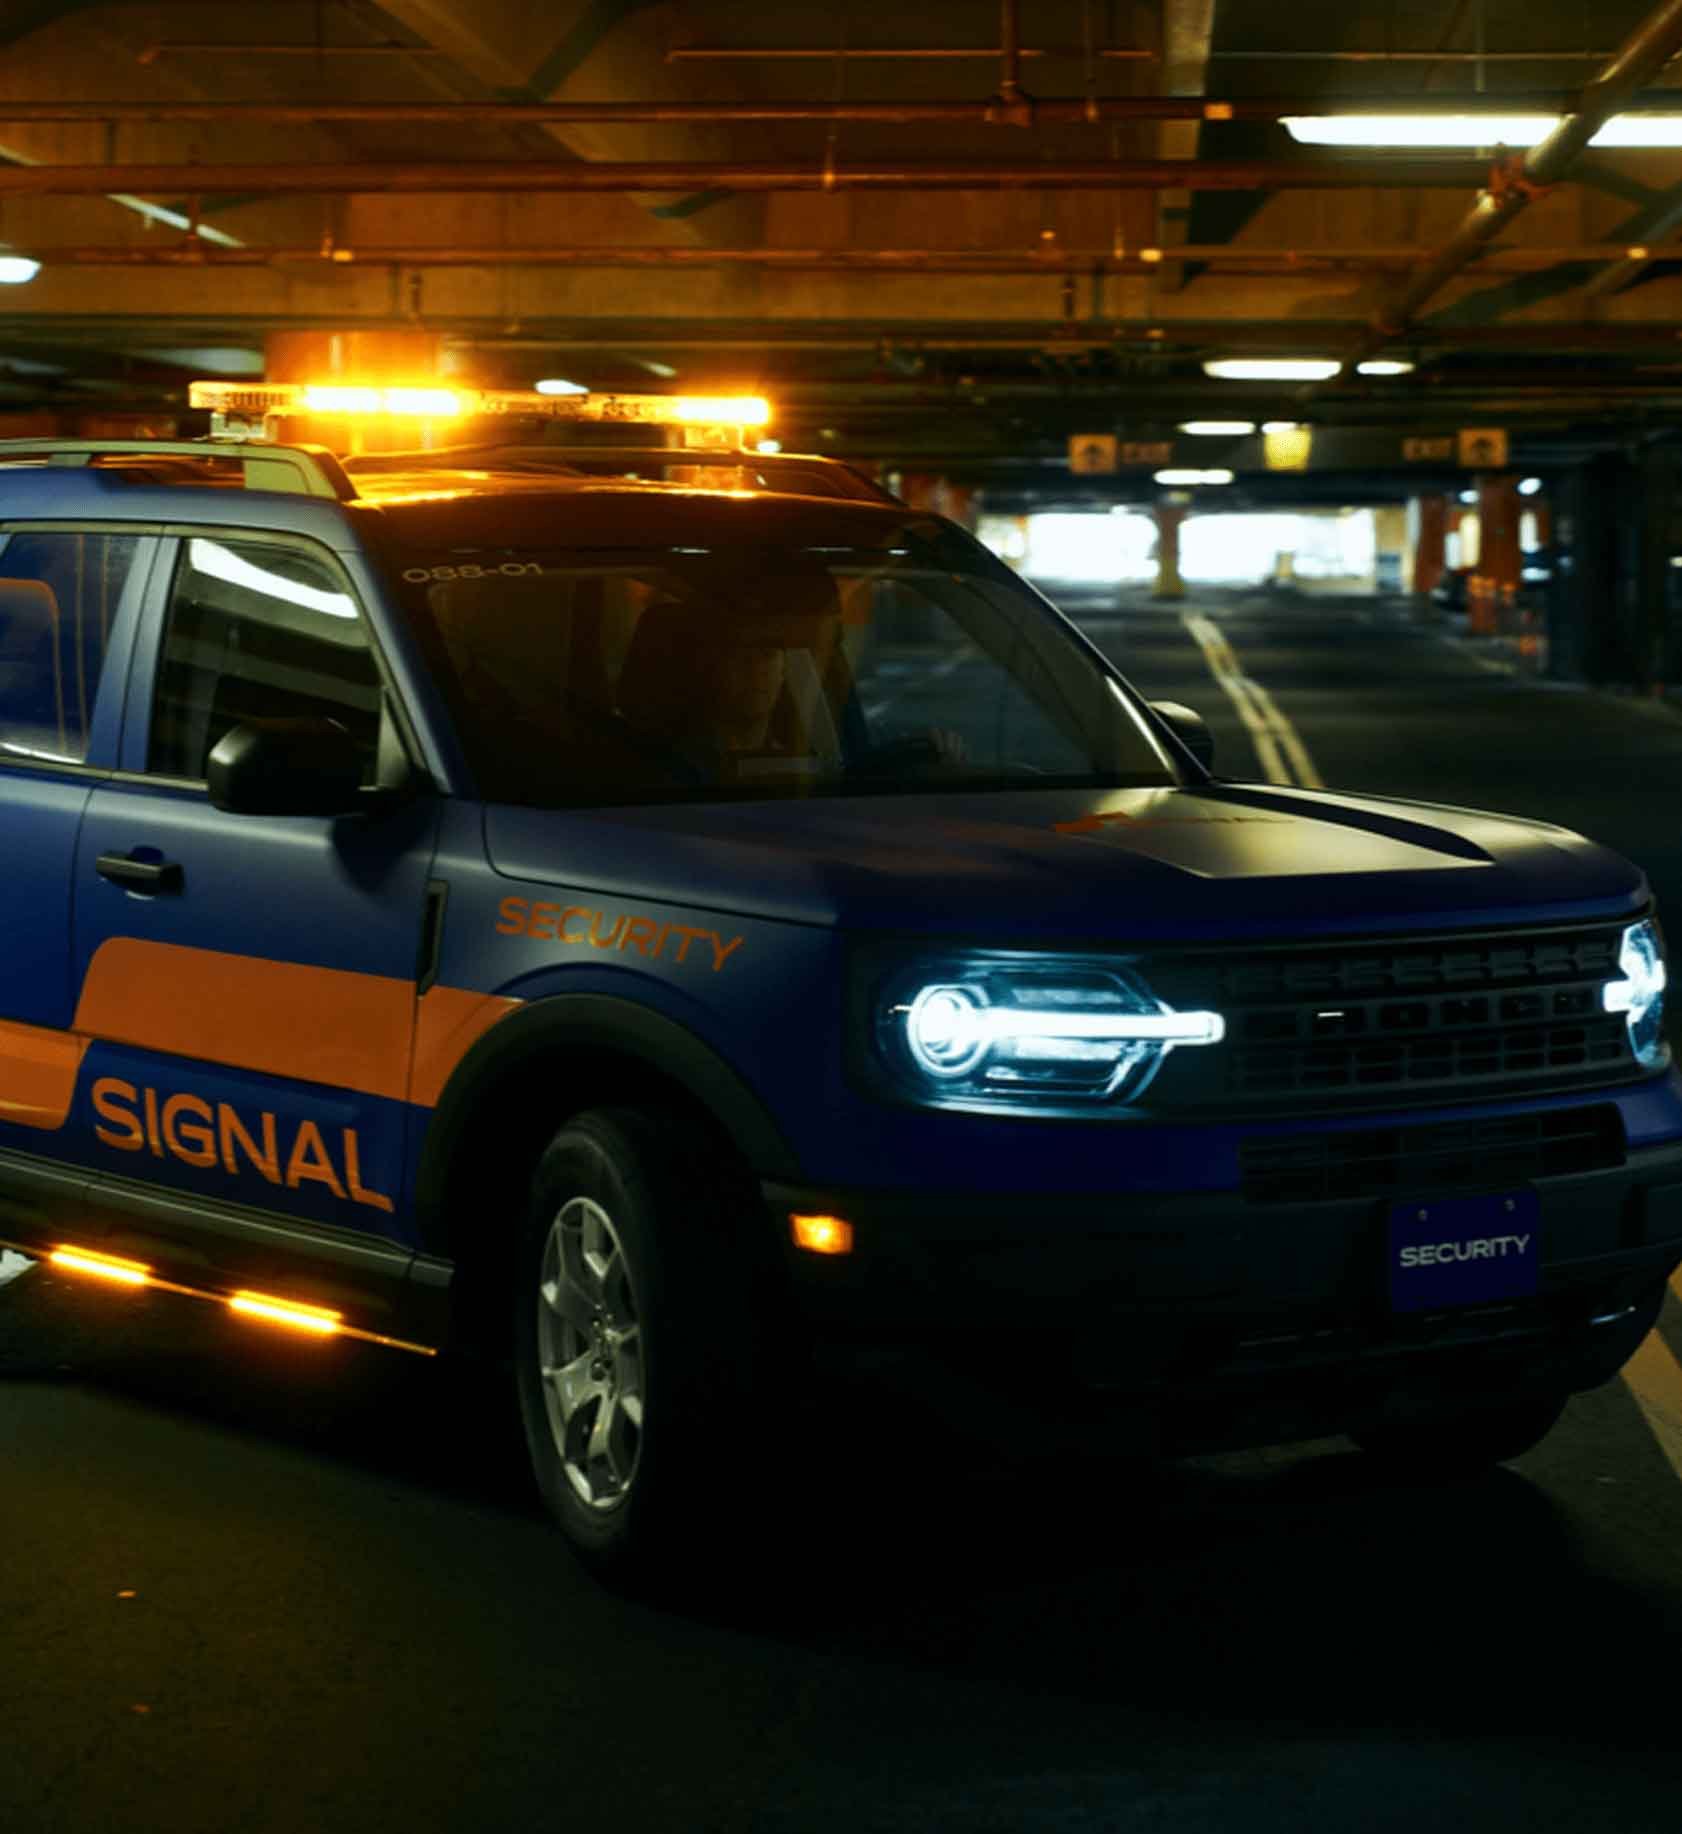 Signal company vehicle in parking garage